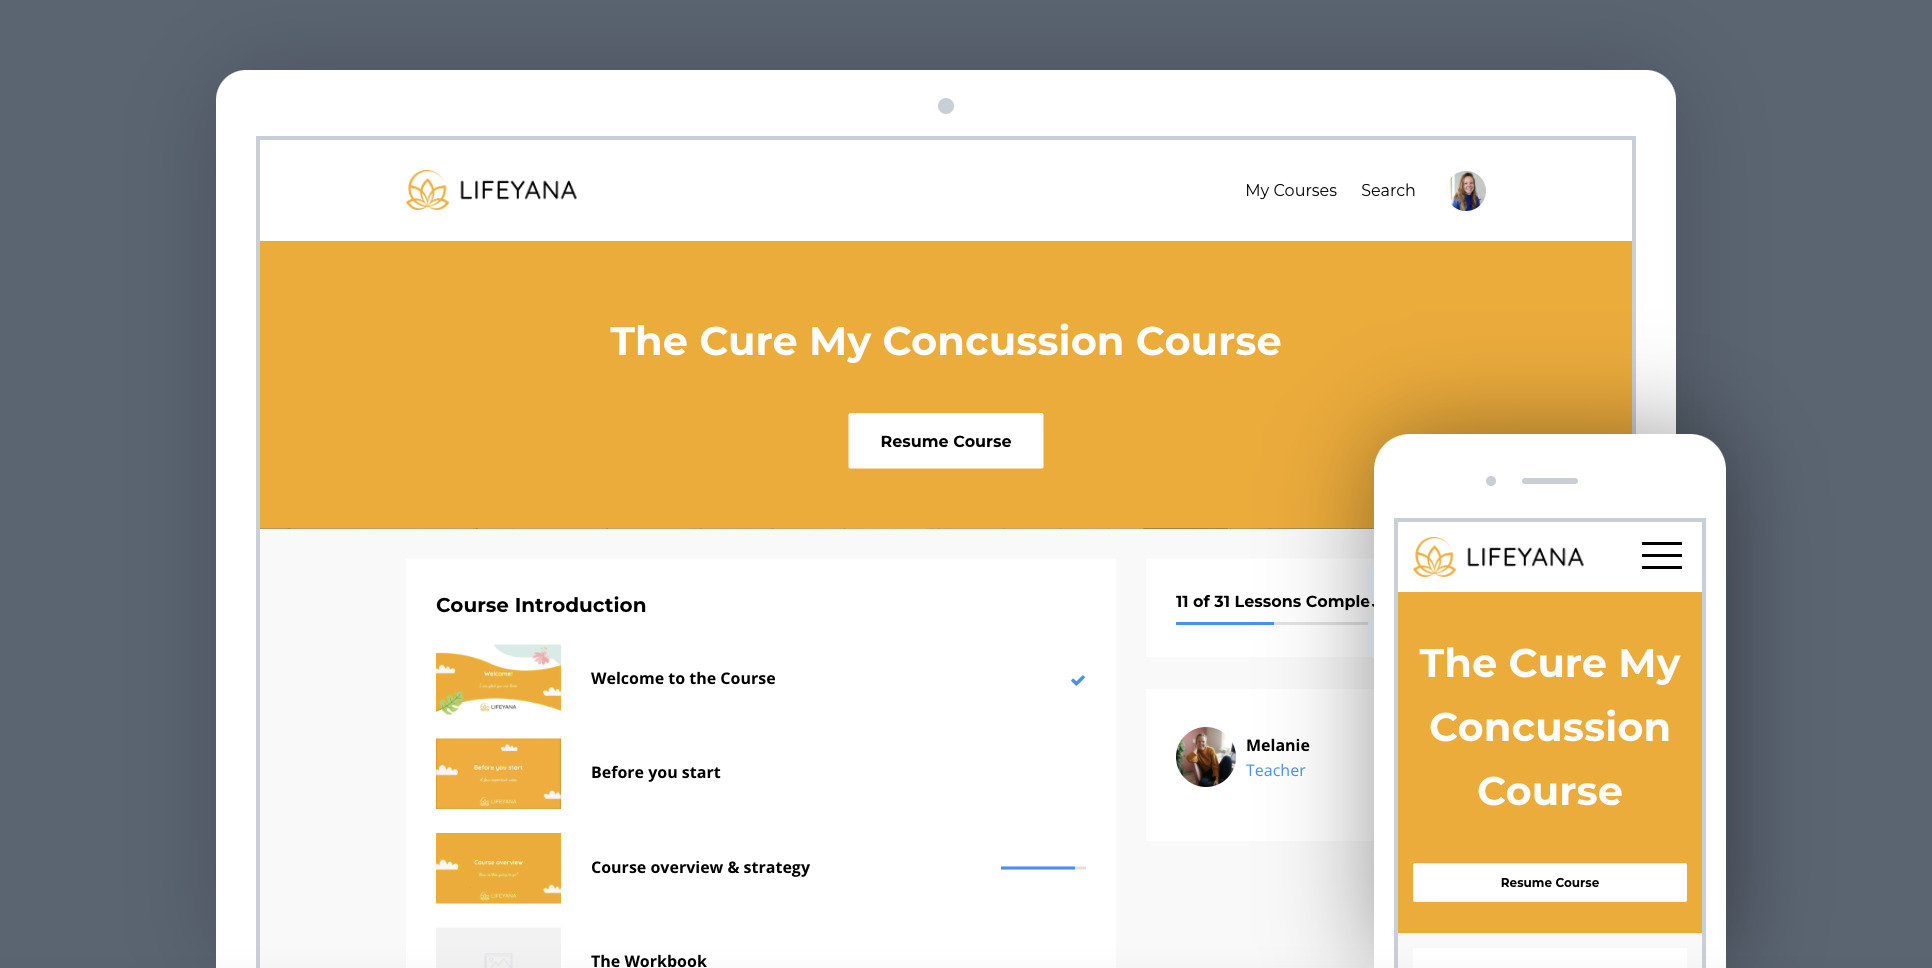 The Cure My Concussion Course